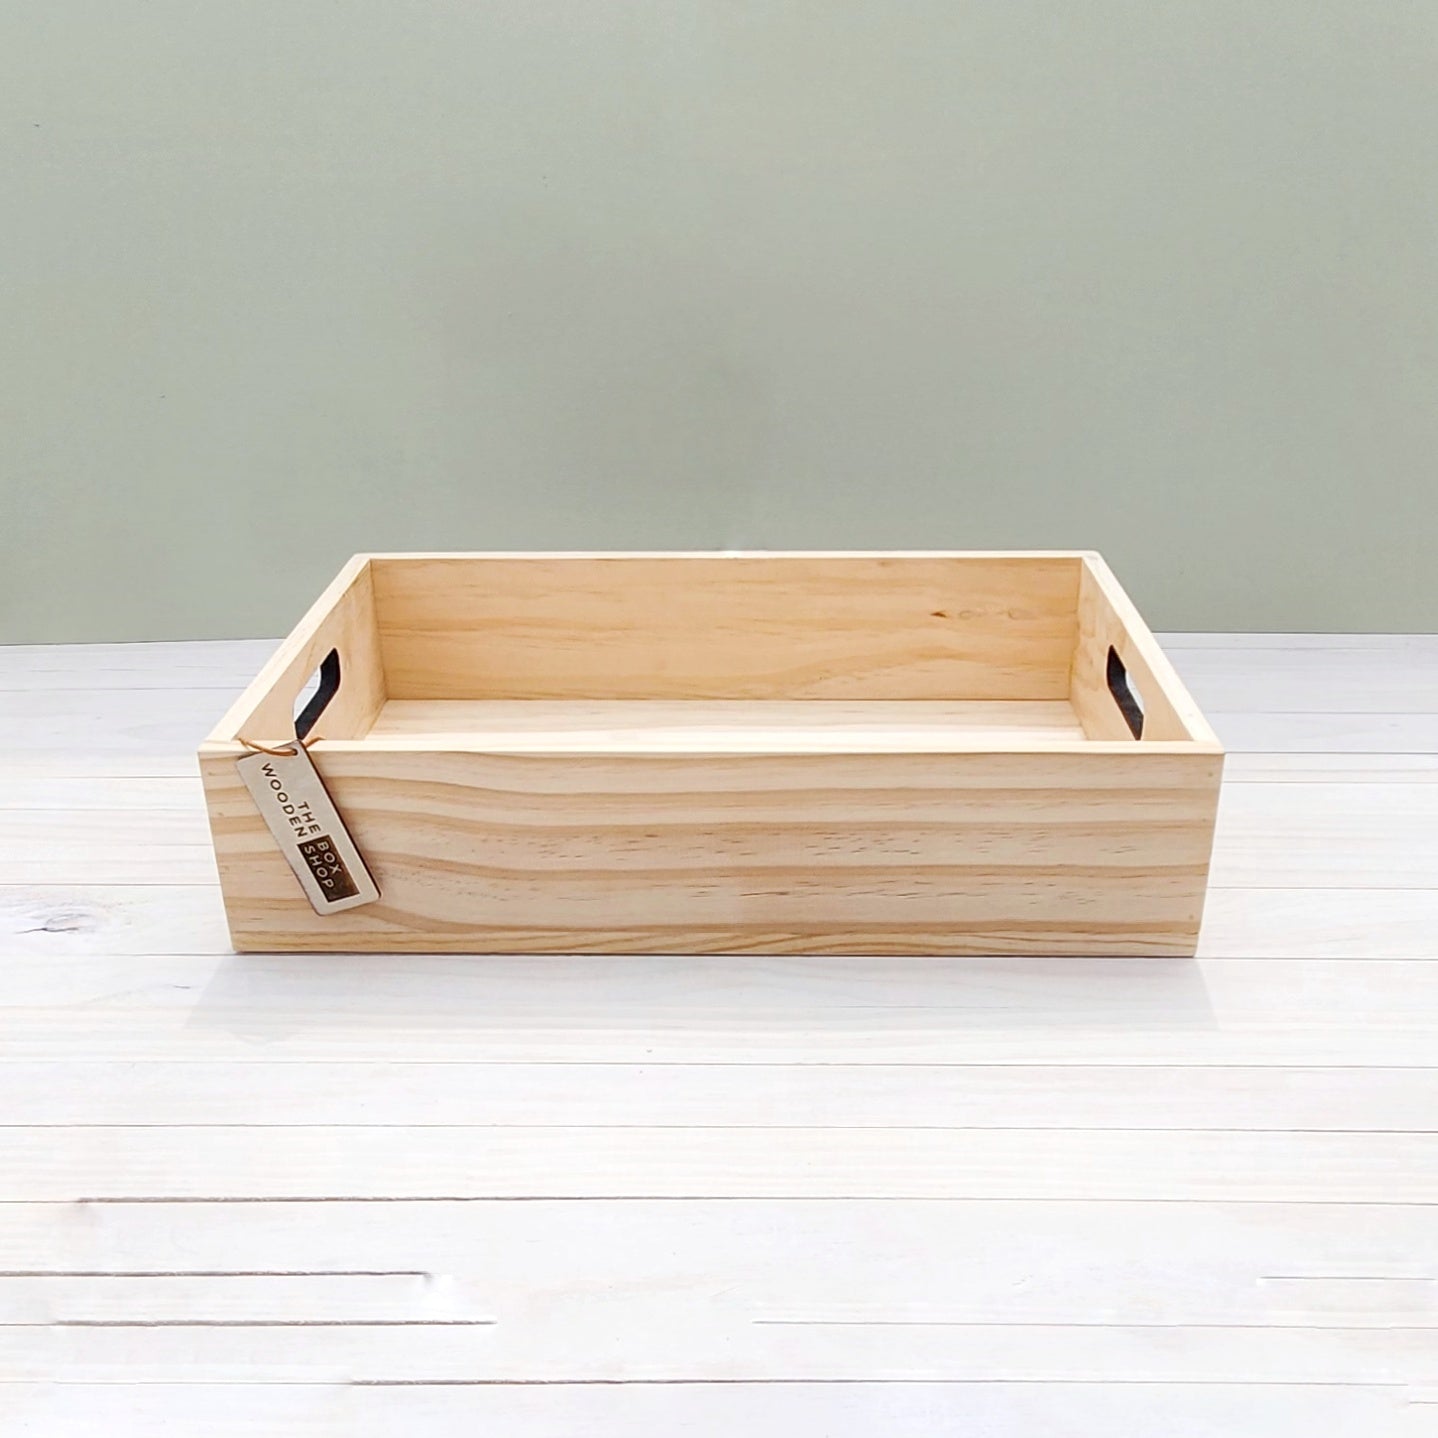 Wooden Wooden Display Tray (Blank)